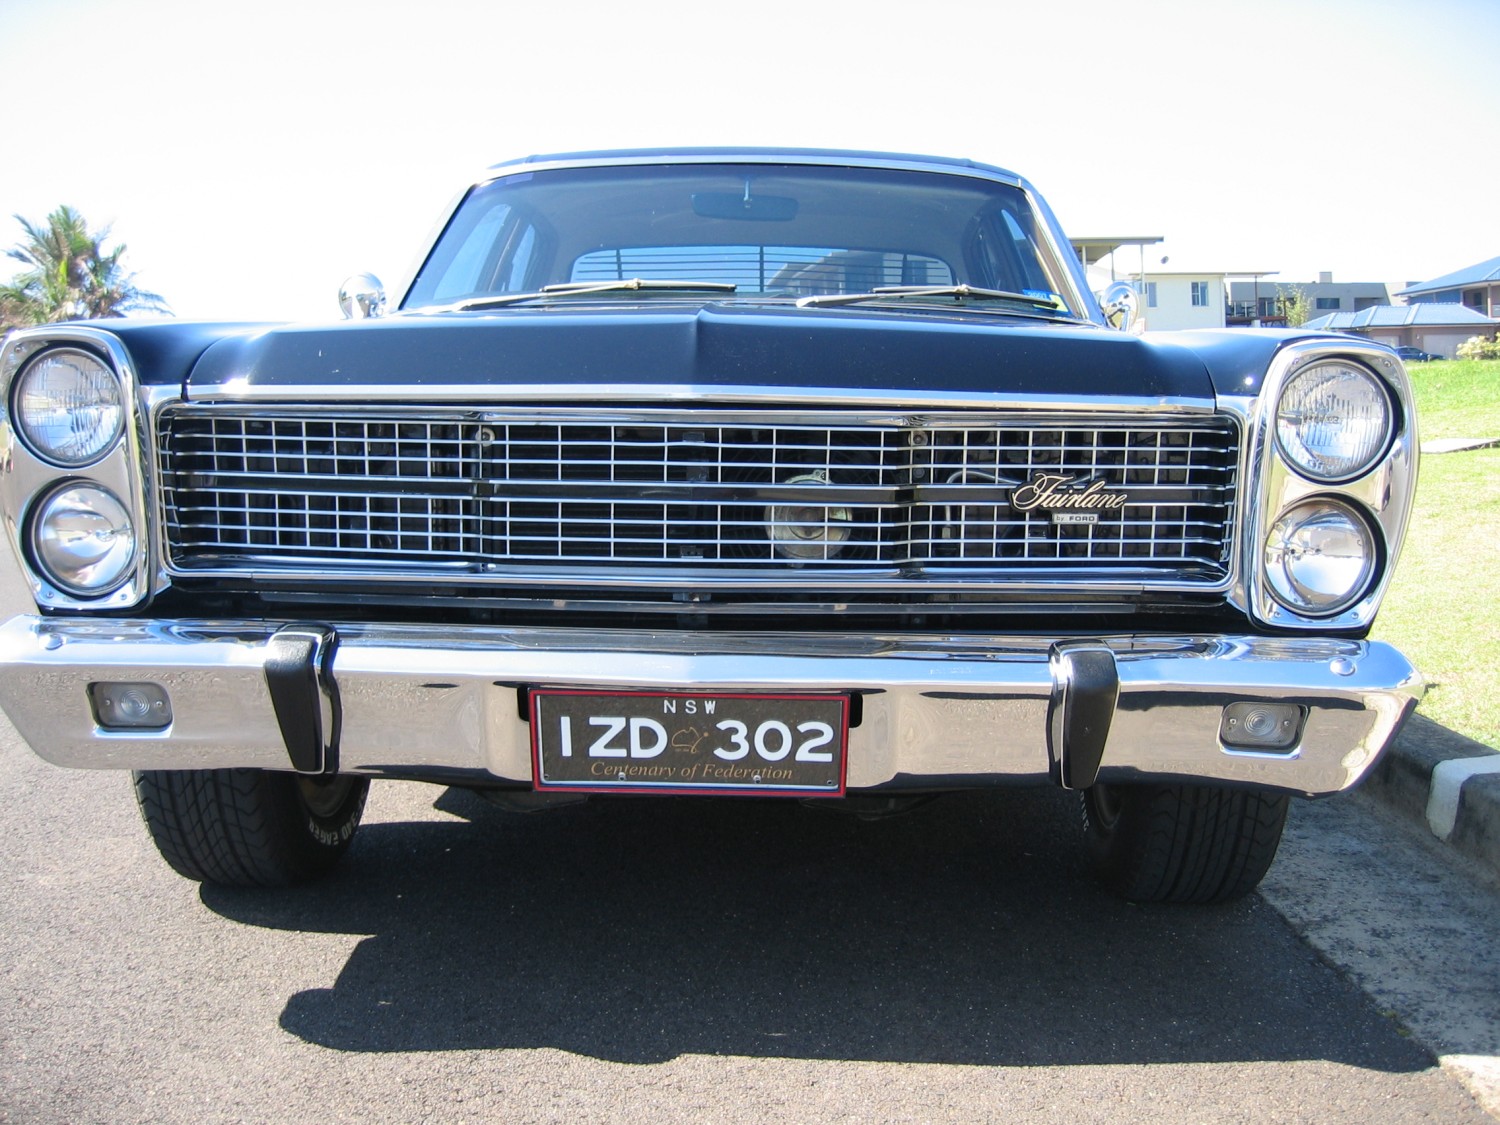 1971 Ford Fairlane ZD